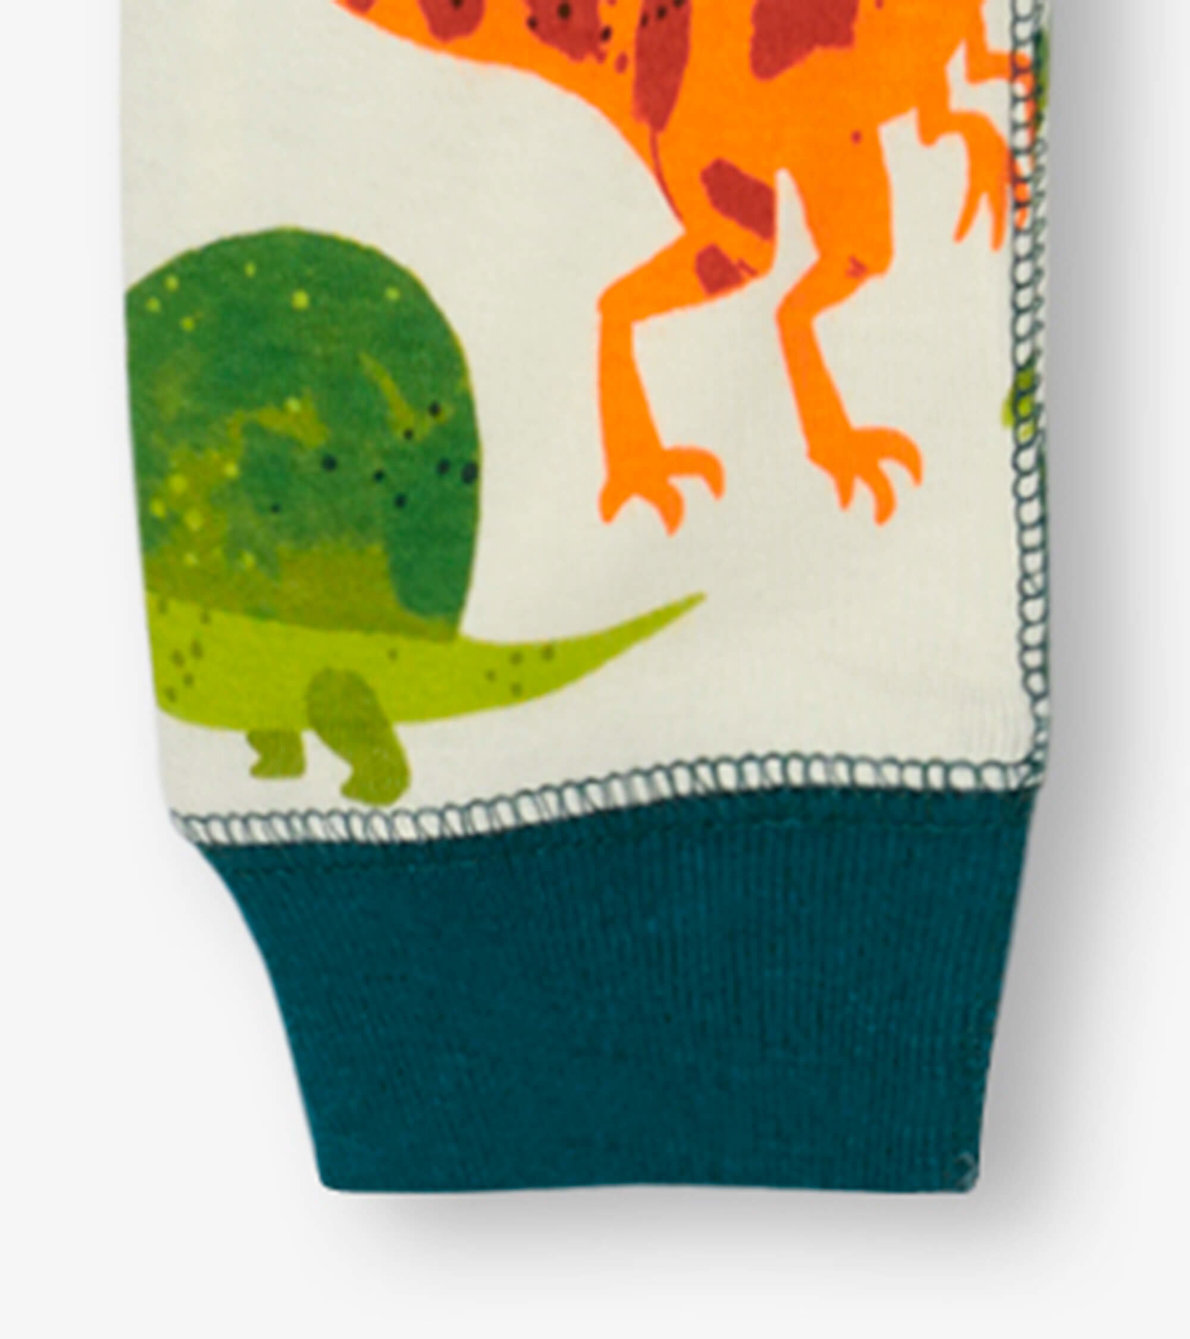 View larger image of Dinosaurs Organic Cotton Baby Sleeper